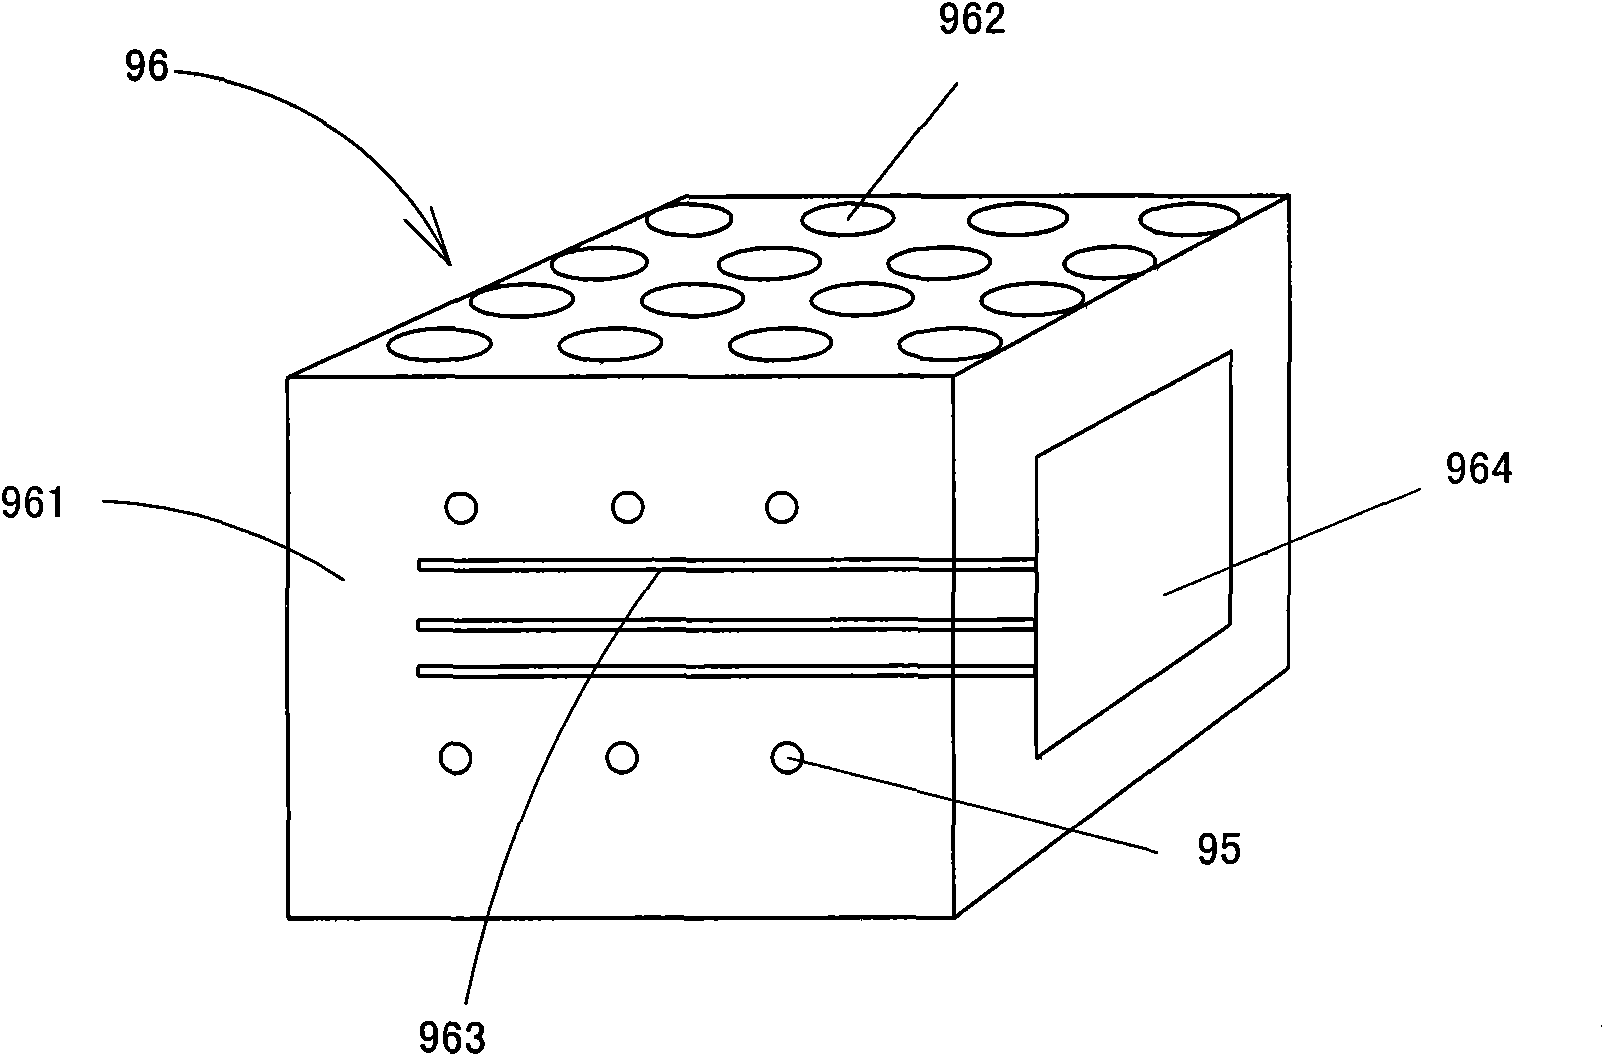 Integrated concentrating solar power and seawater desalination method and system